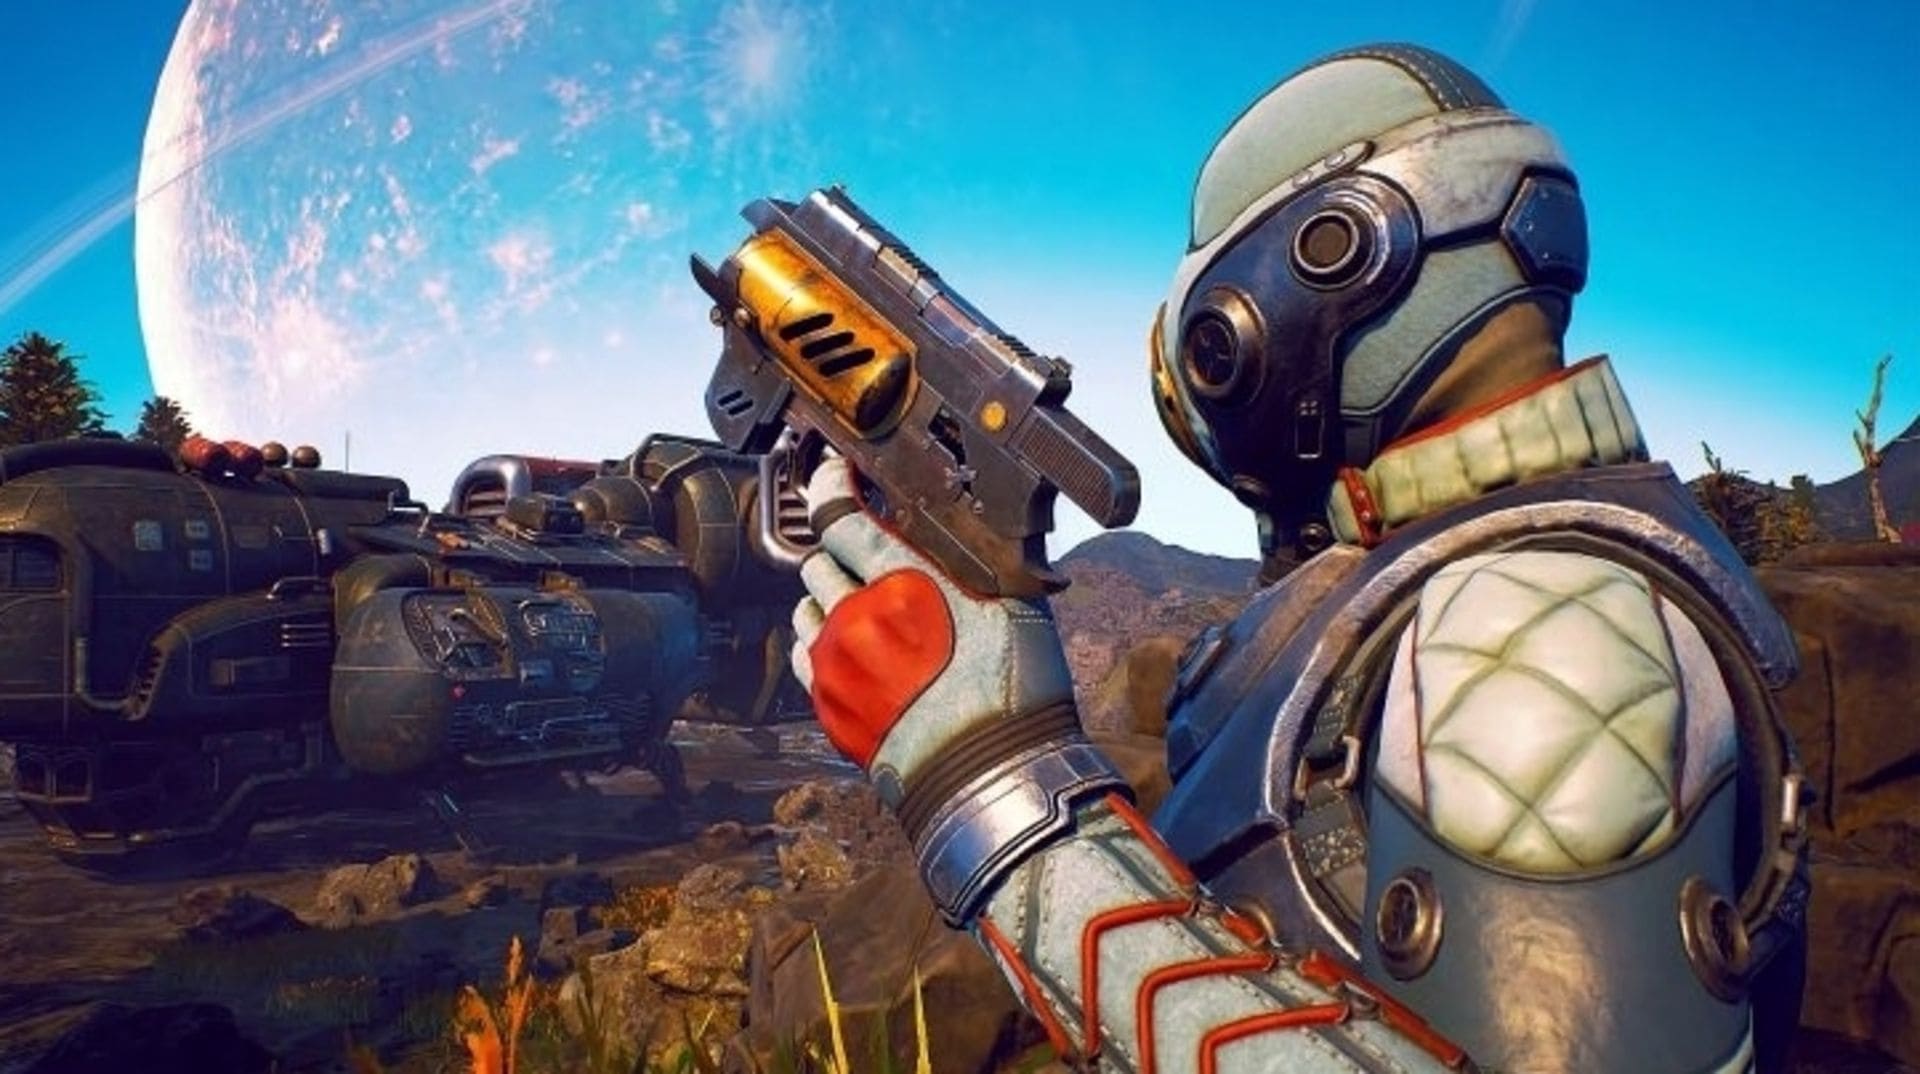 The Outer Worlds Has Sold 2 Million Copies, According to Take-Two